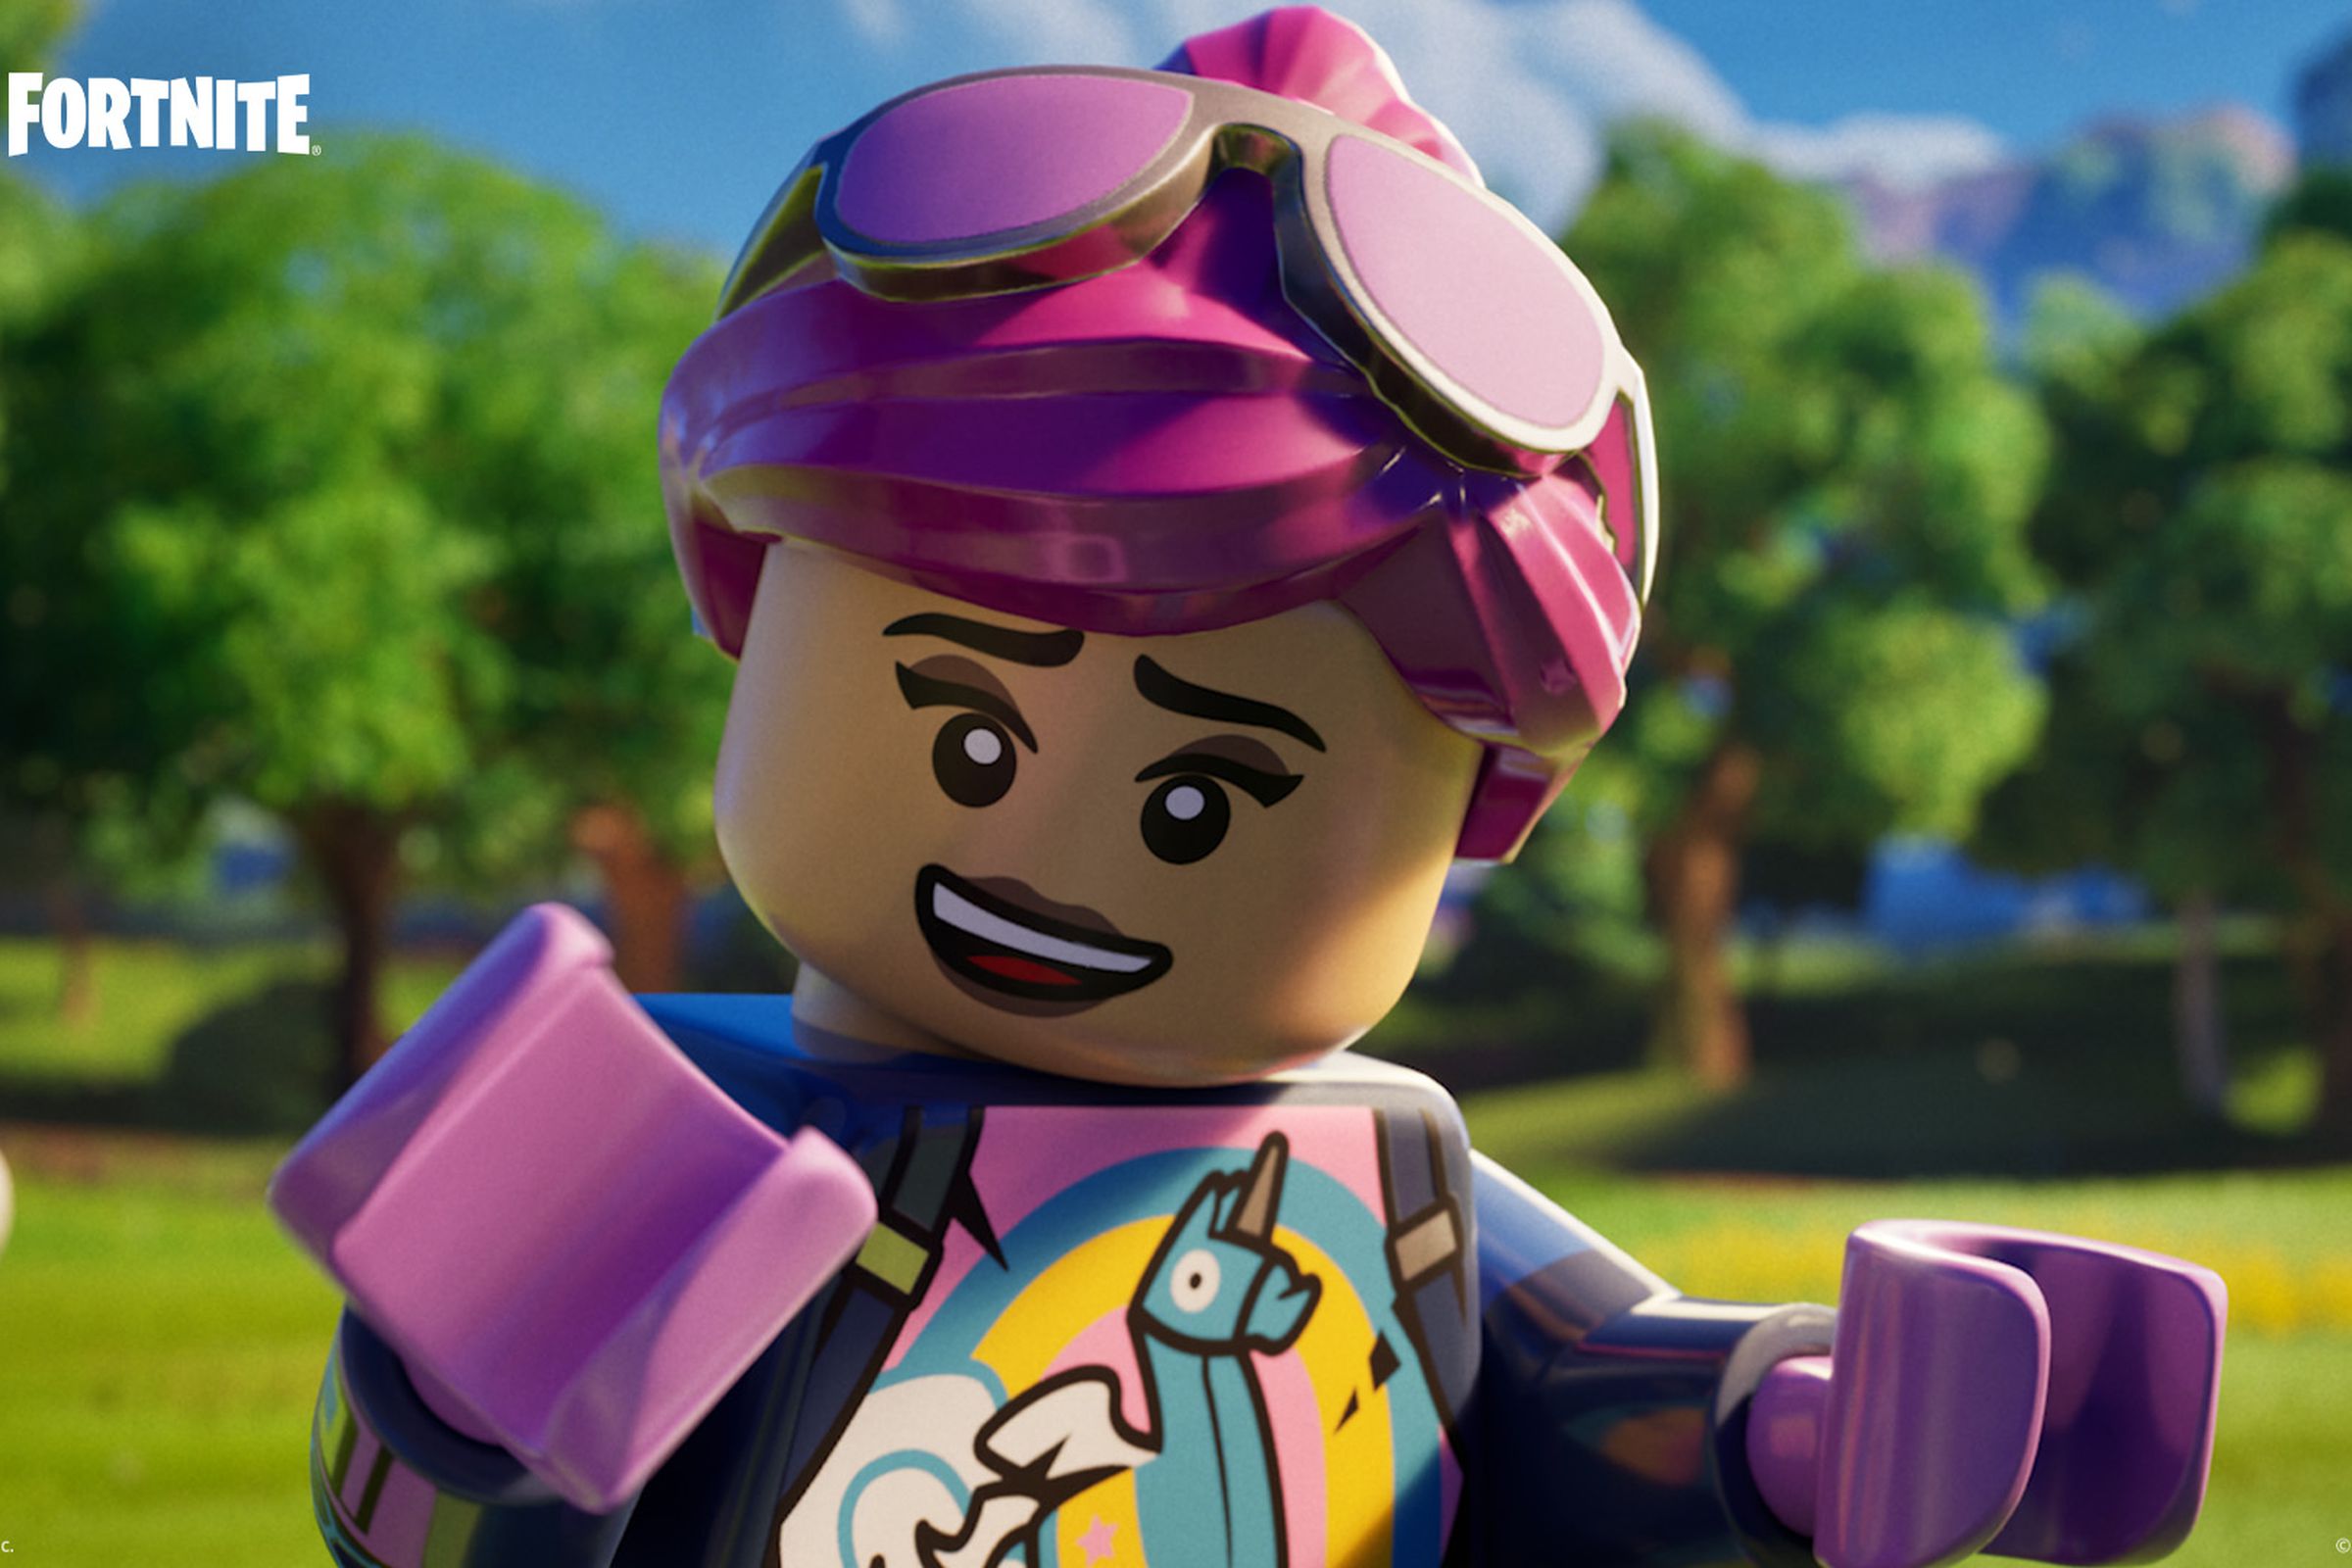 A screenshot from the video game Lego Fortnite.